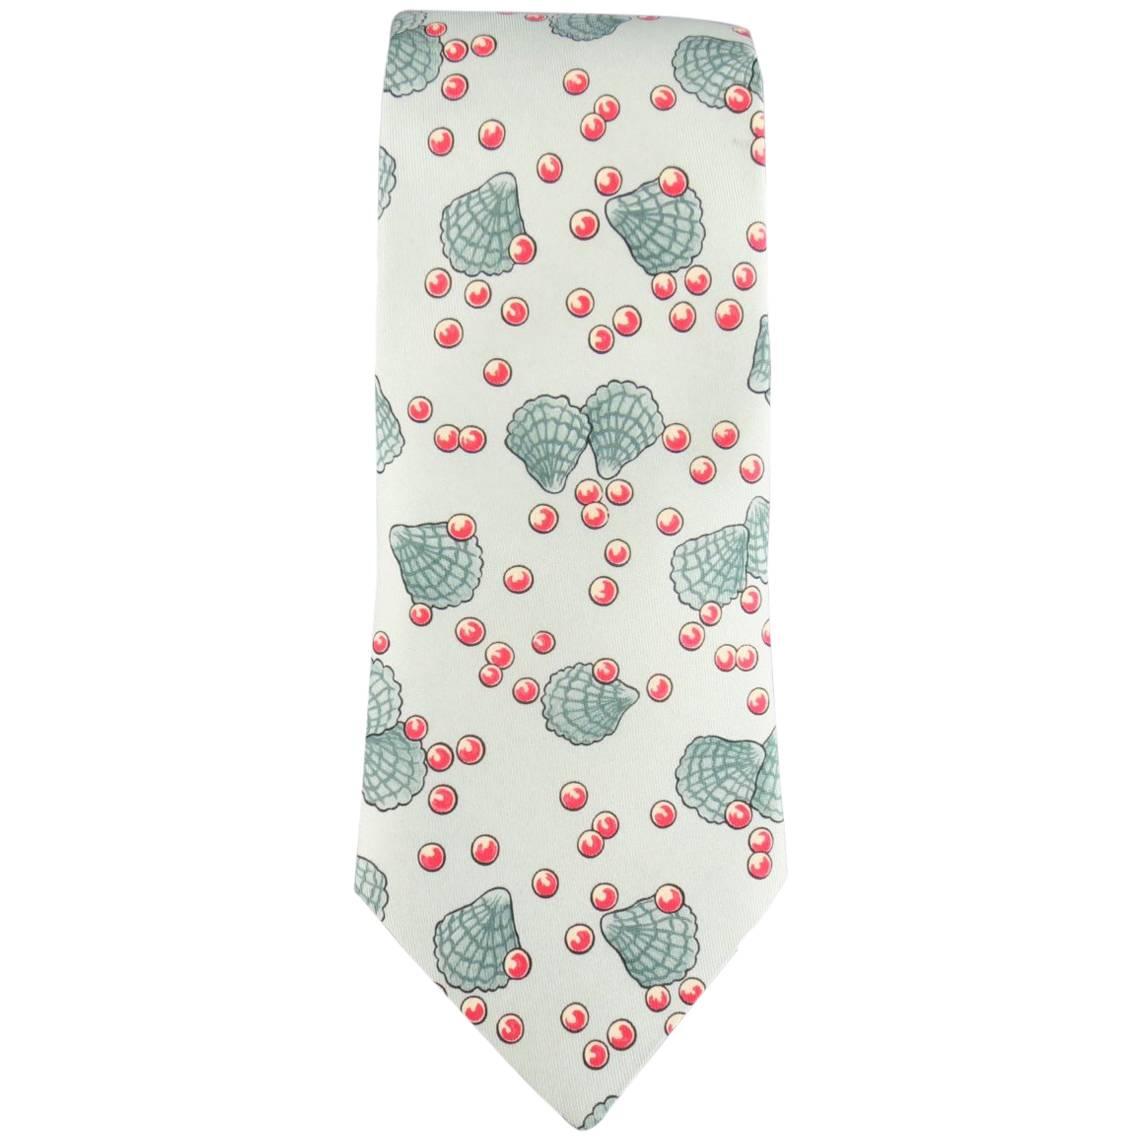 HERMES Mint Clam Sea Shell & Red Pearl Print Silk Tie